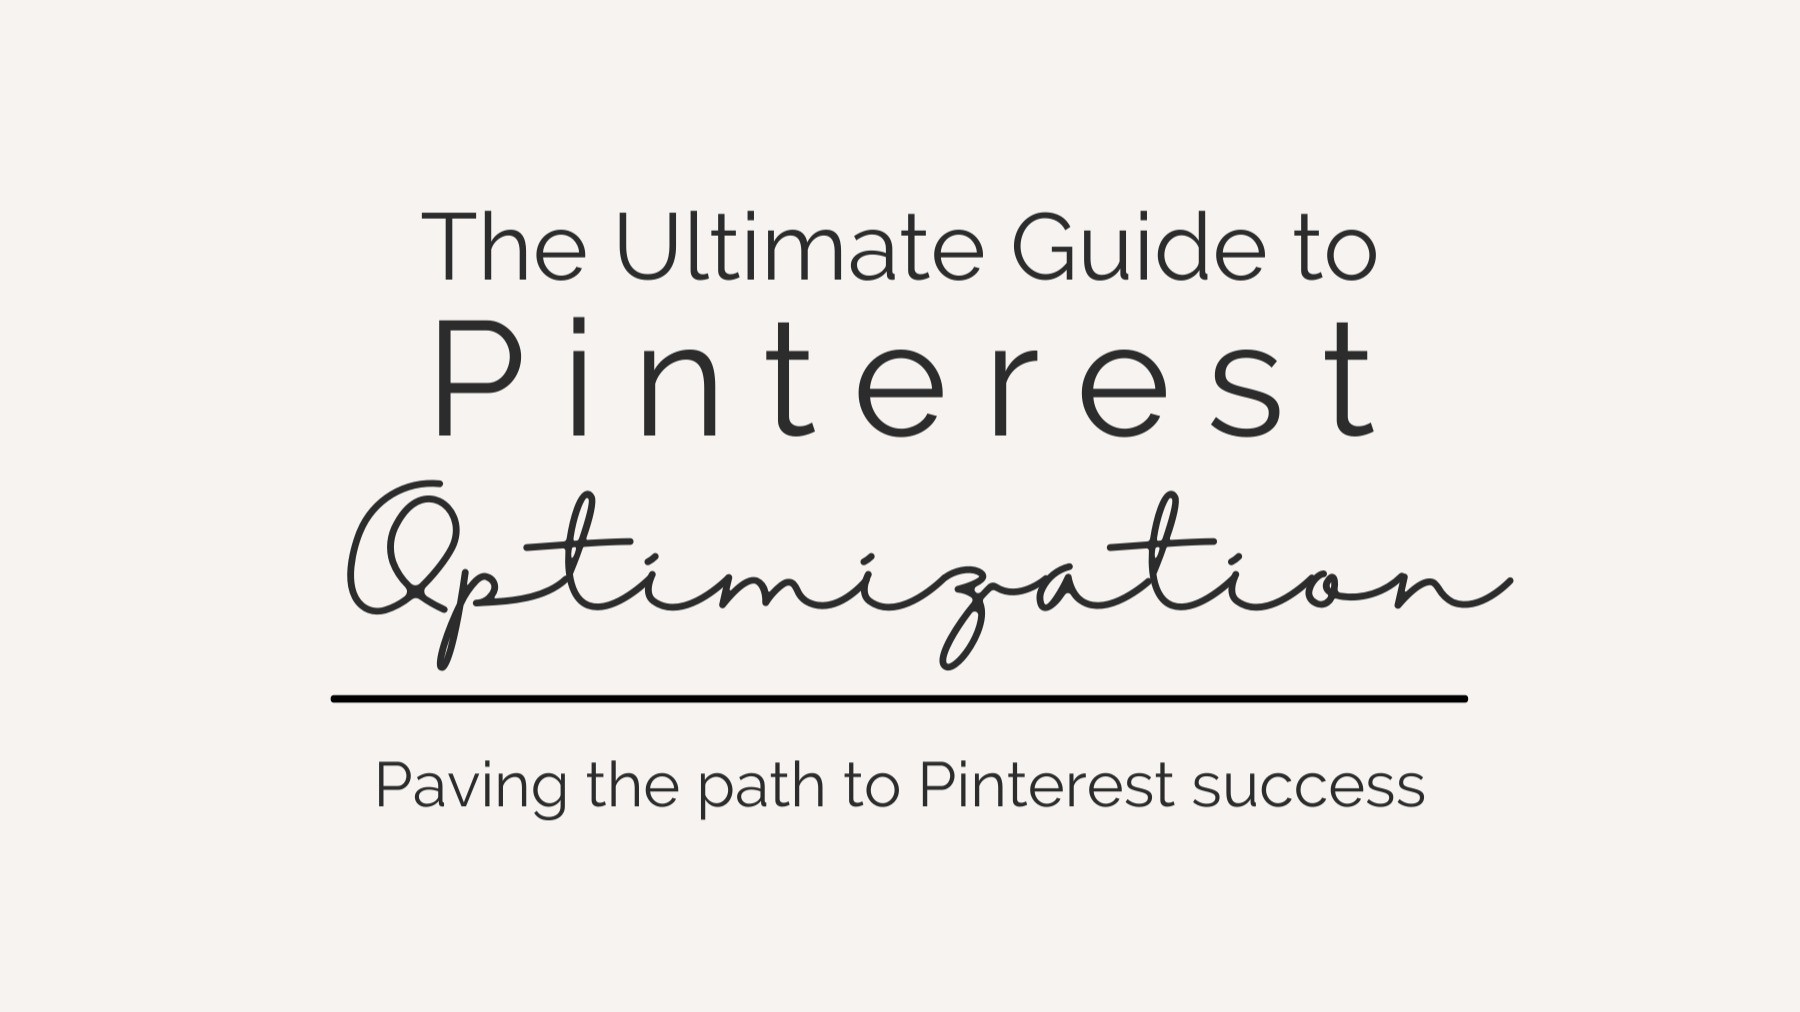 The Ultimate Guide to Pinterest Optimization